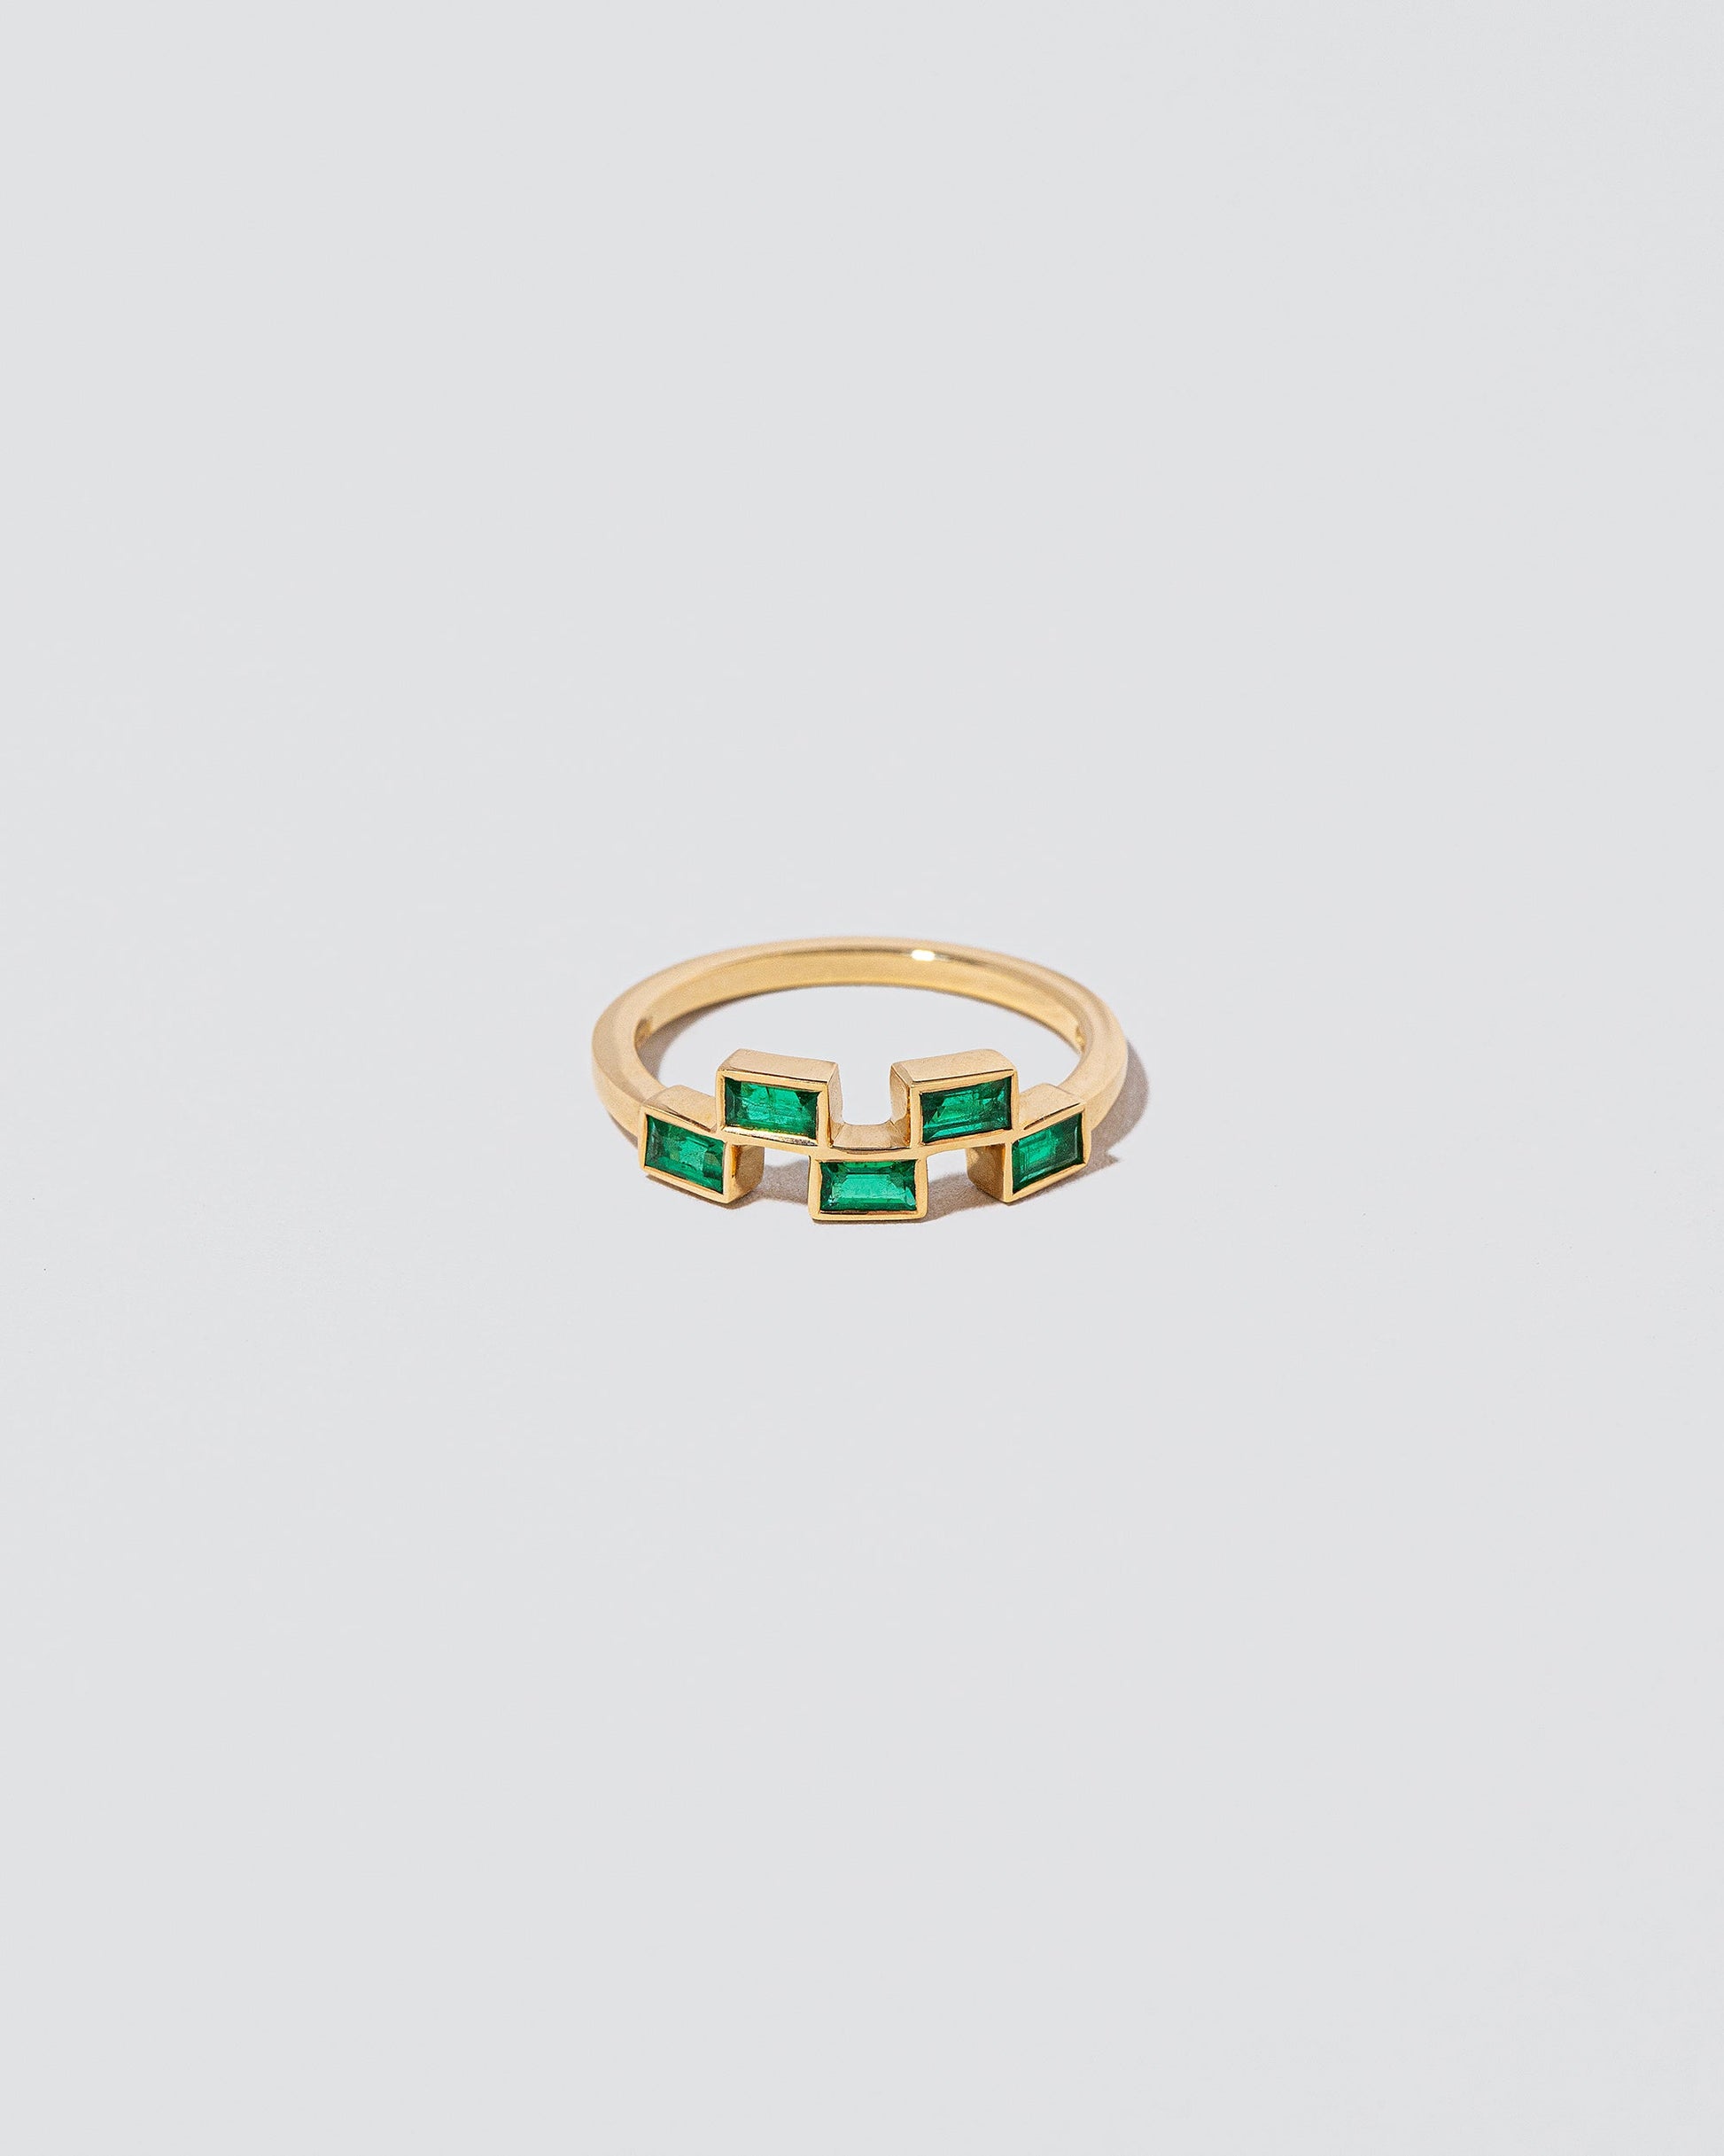 Emerald Brick Ring on light color background.